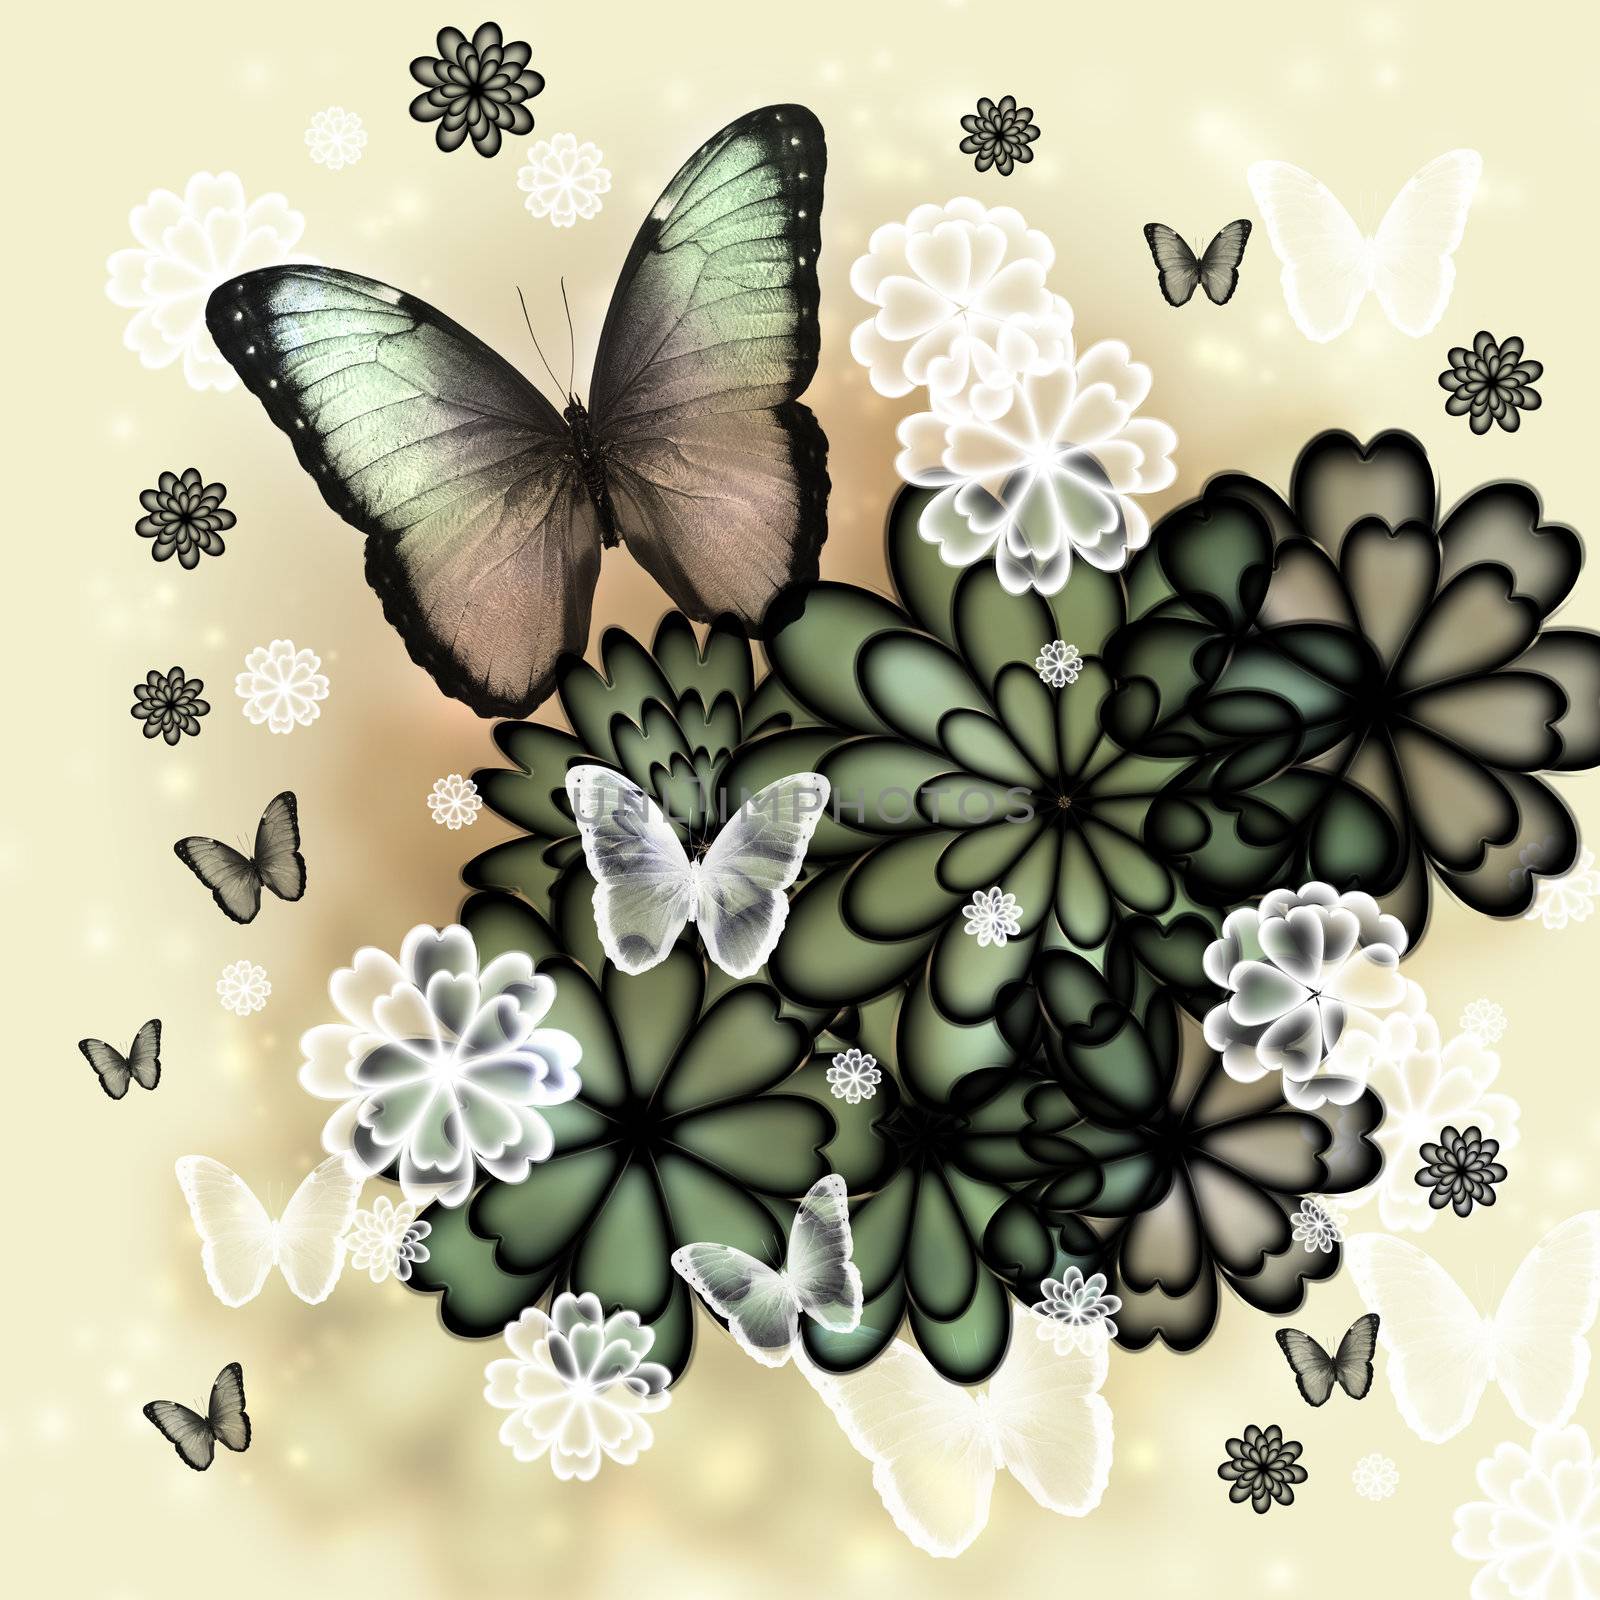 Butterflies and blossoms tinted illustration